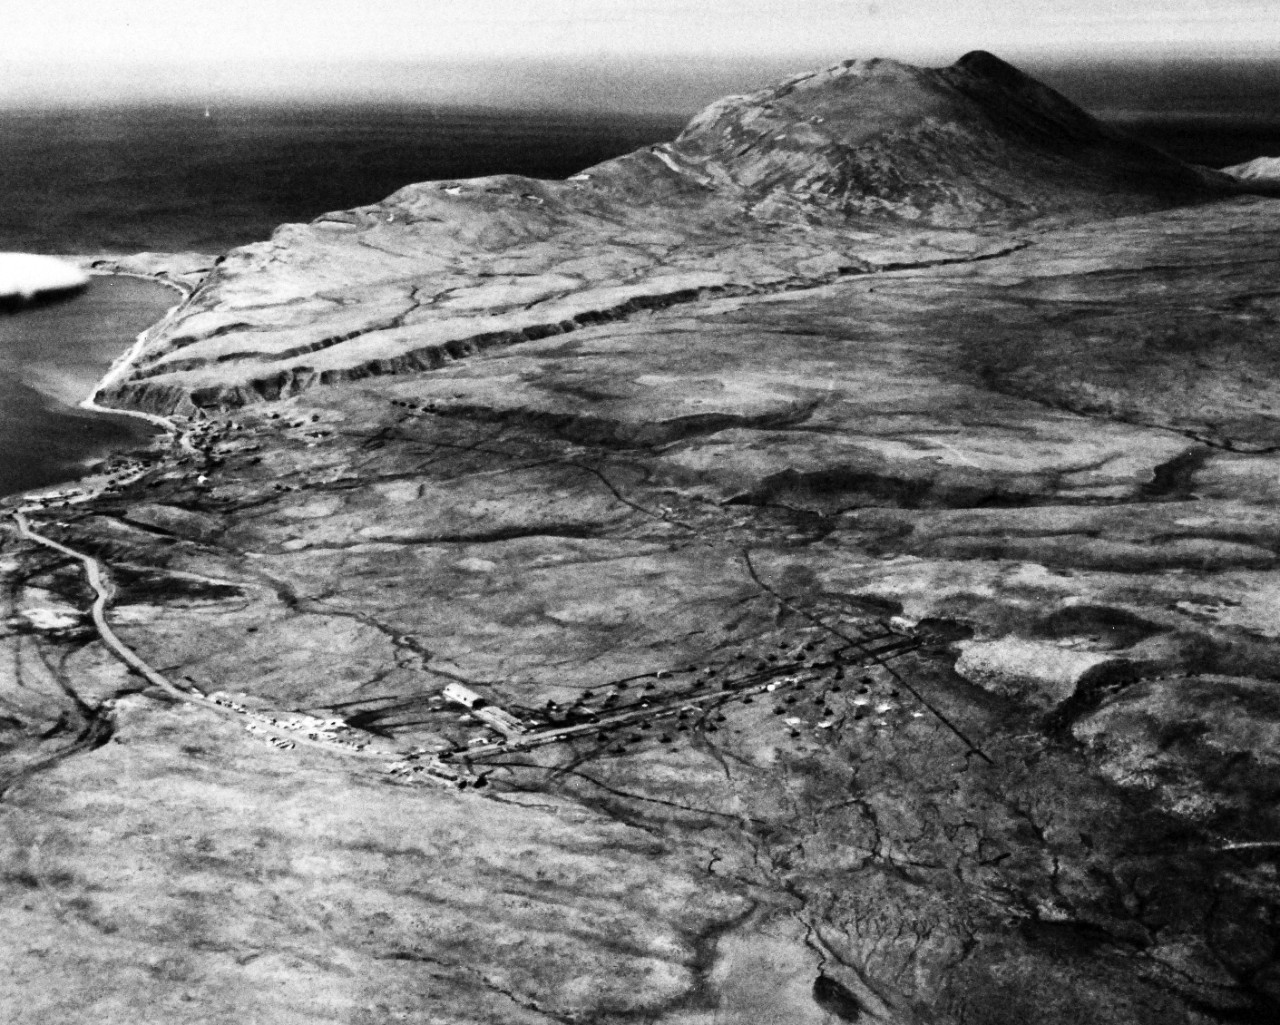 80-G-79447:   U.S. Naval Air Station, Adak, Alaska, July 1943.   Oblique of Andrew Lagoon Area on Adak, Alaska, Aleutian Islands, July 11, 1943.   Official U.S. Navy Photograph, now in the collections of the National Archives.   (2015/8/18). 